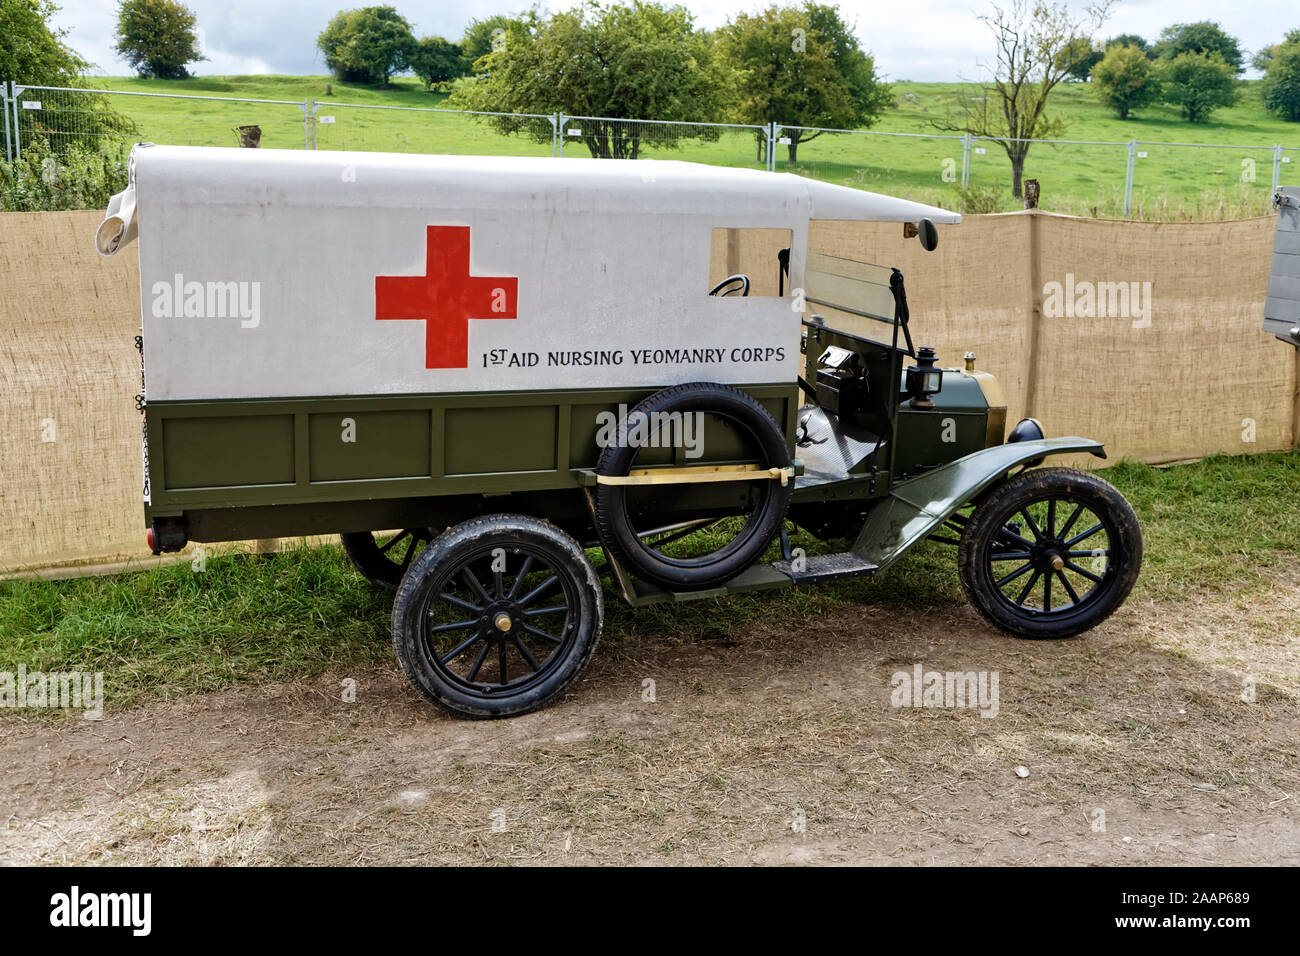 A re-created Ford Model T Ambulance that was used by the British Army 1st Aid Nursing Yeomanry Corps in WW1 at the Great Dorset Steam Fair 2015 Stock Photo